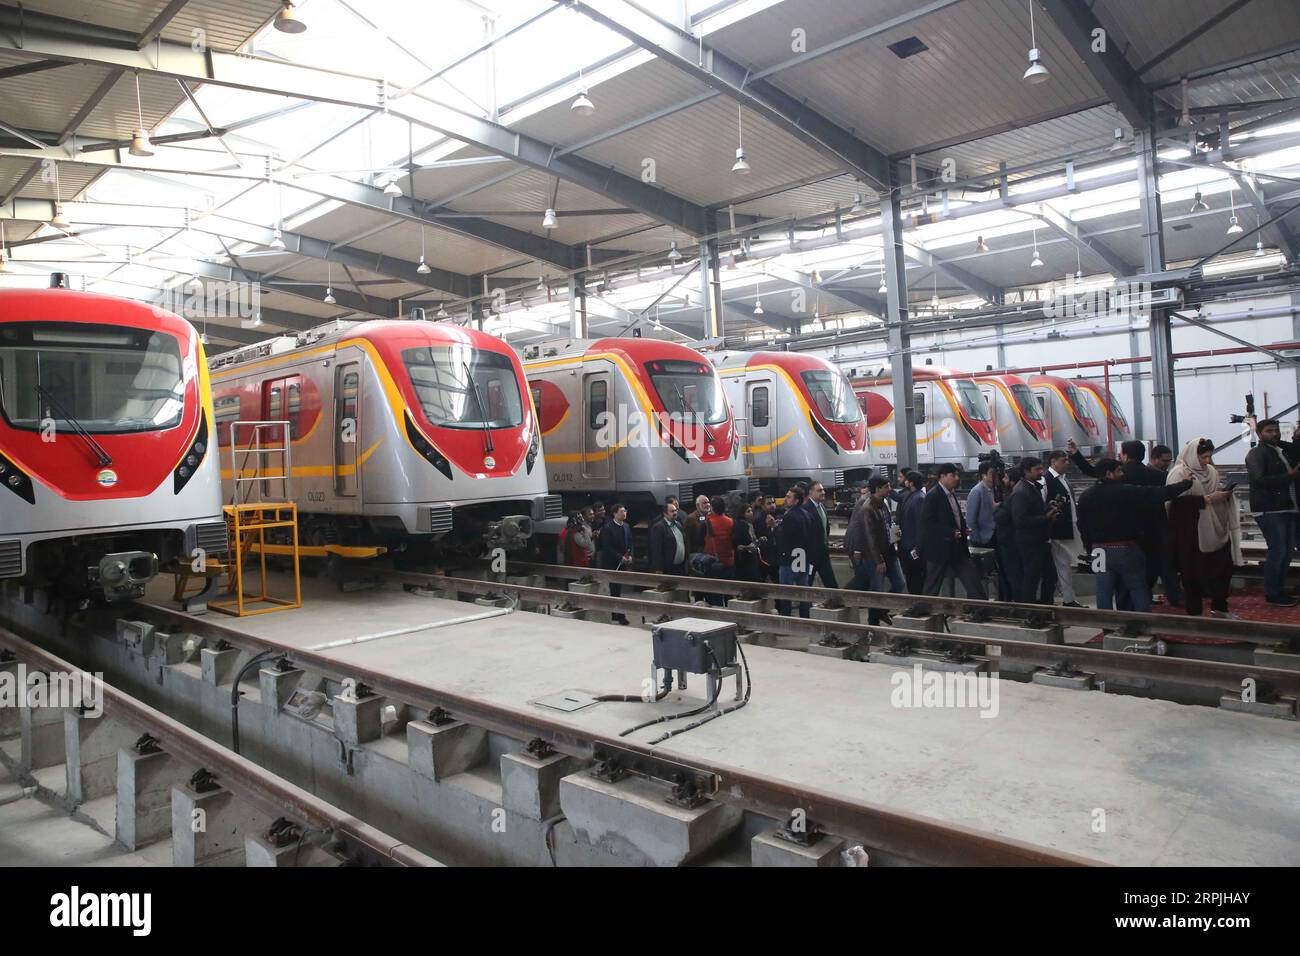 191211 -- LAHORE, Dec. 11, 2019 -- People walk out of a train during a test run of the Orange Line Metro Train in Lahore, Pakistan, on Dec. 10, 2019. Pakistan s first-ever mass rapid urban transit train took its first test run here on Tuesday after the completion of the physical infrastructure of the project under the China-Pakistan Economic Corridor CPEC.  PAKISTAN-LAHORE-CPEC-ORANGE LINE METRO TRAIN LiuxTian PUBLICATIONxNOTxINxCHN Stock Photo